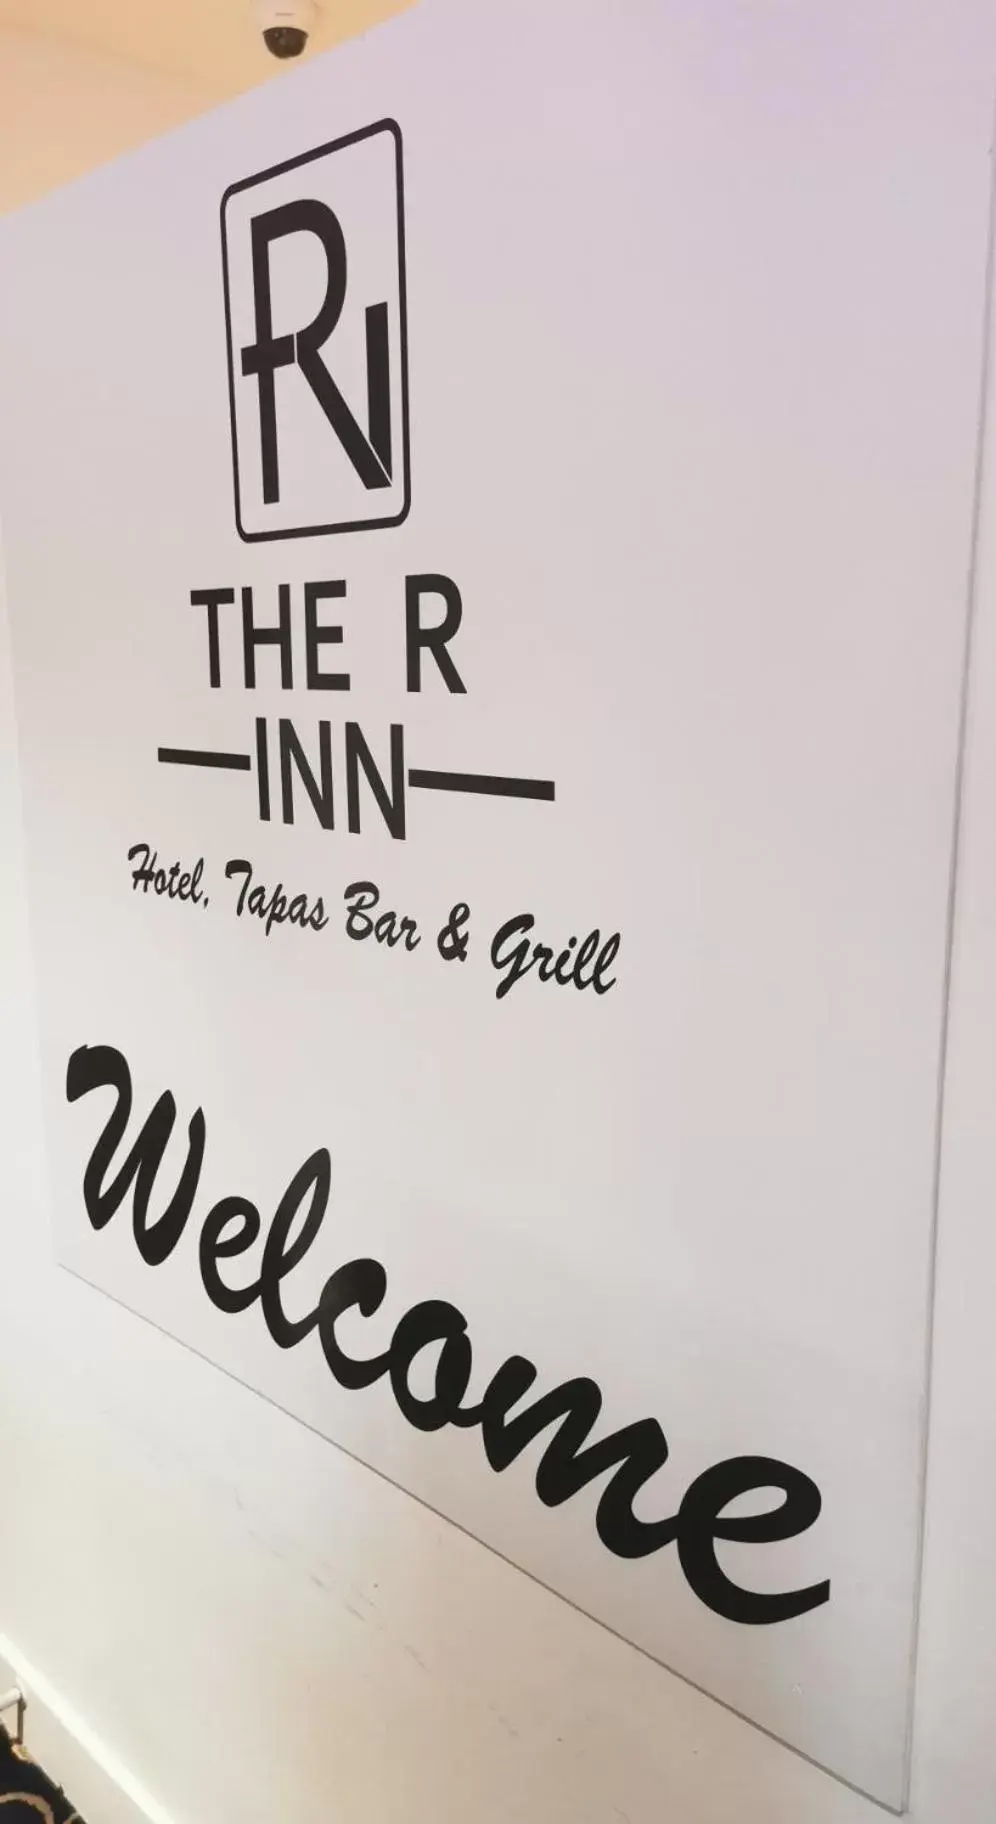 Property logo or sign in The R Inn Hotel